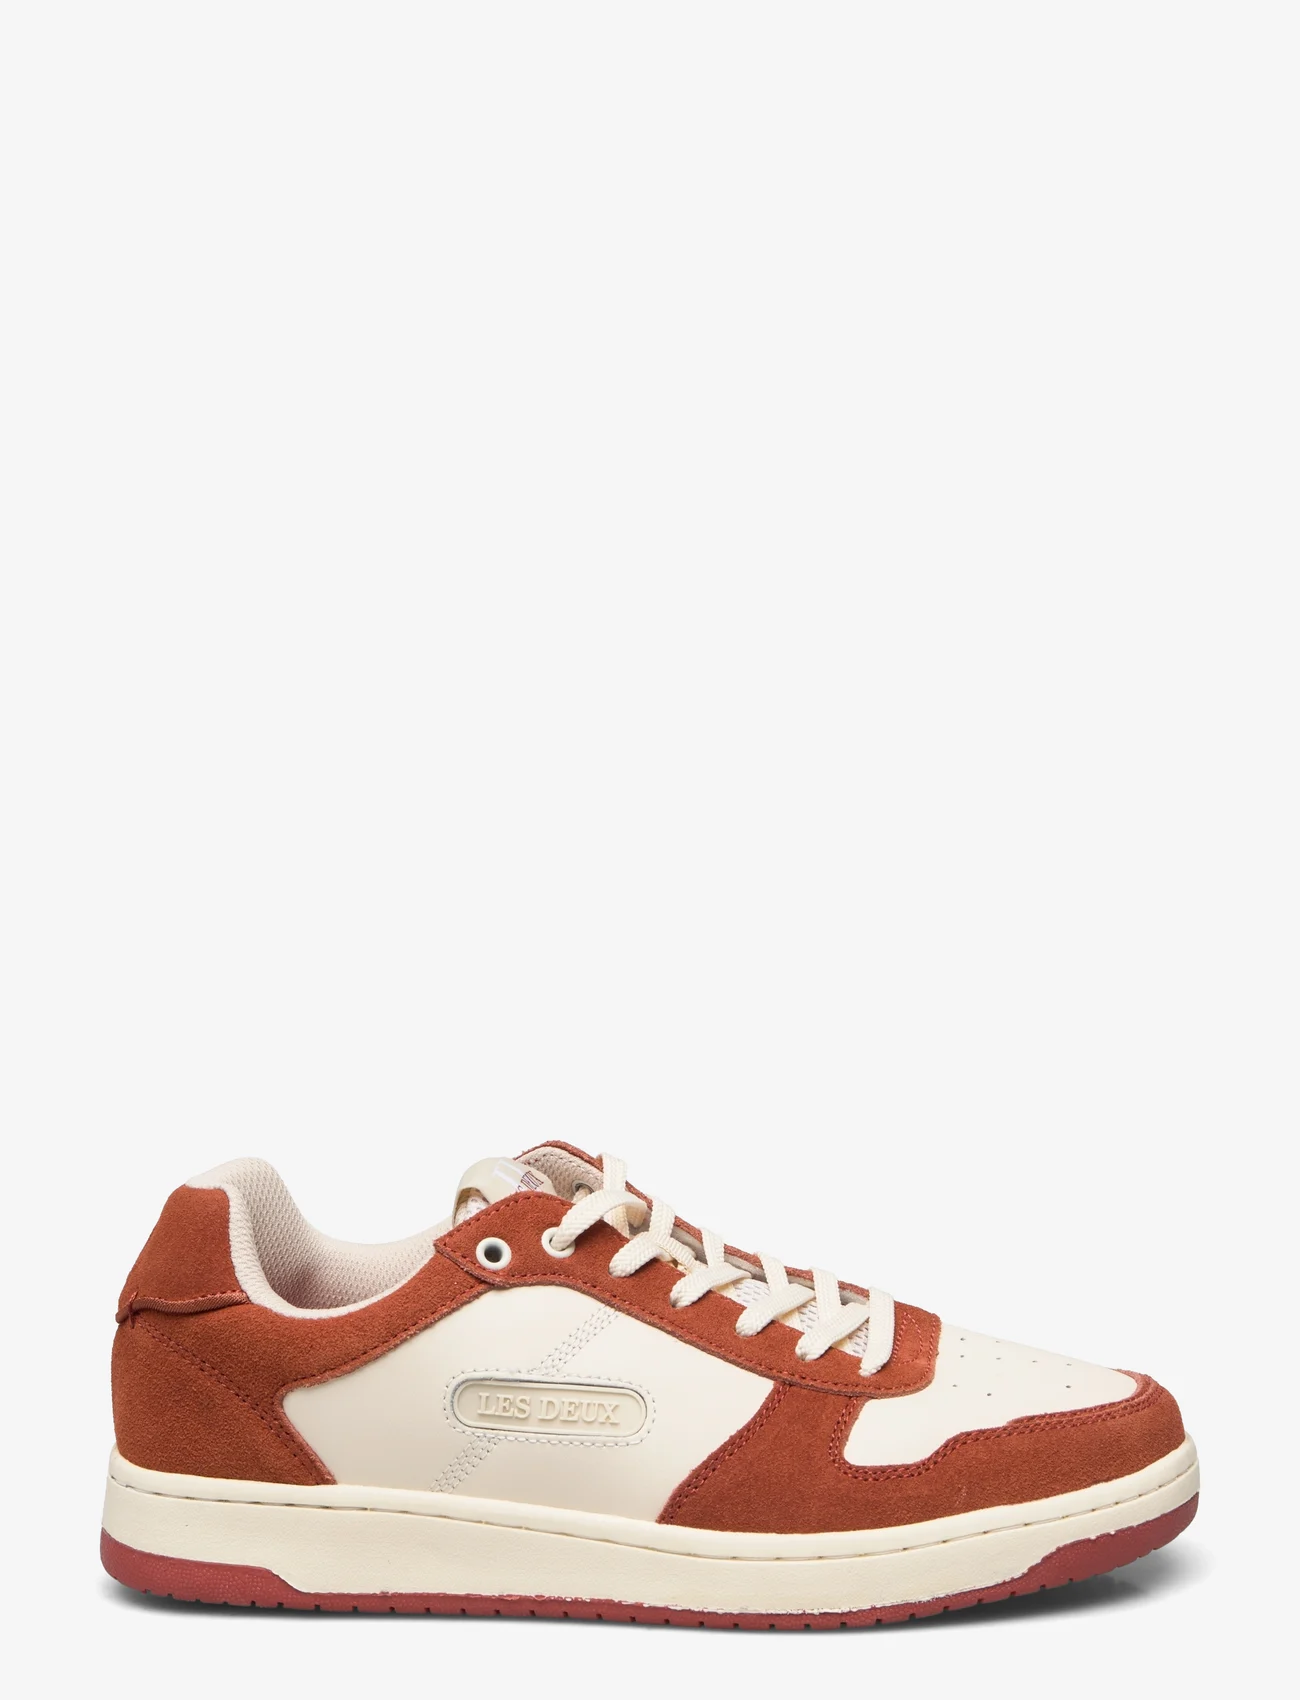 Les Deux - Wright Basketball Sneaker - lave sneakers - white/rust red - 1